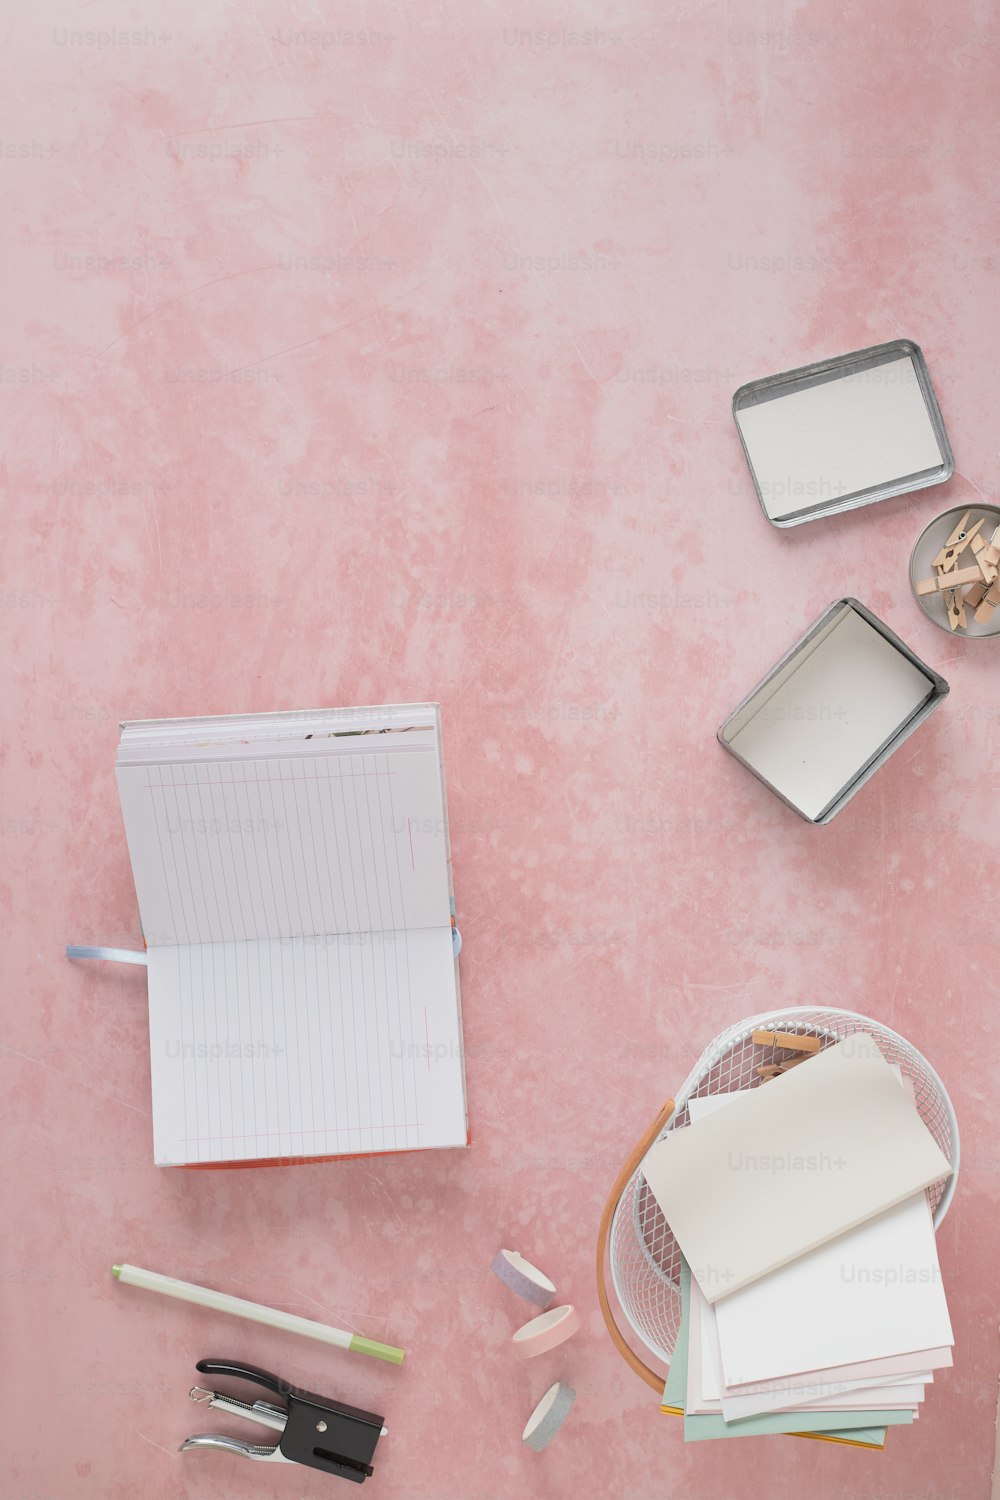 a pink table with a notebook, pen, mirror and other items